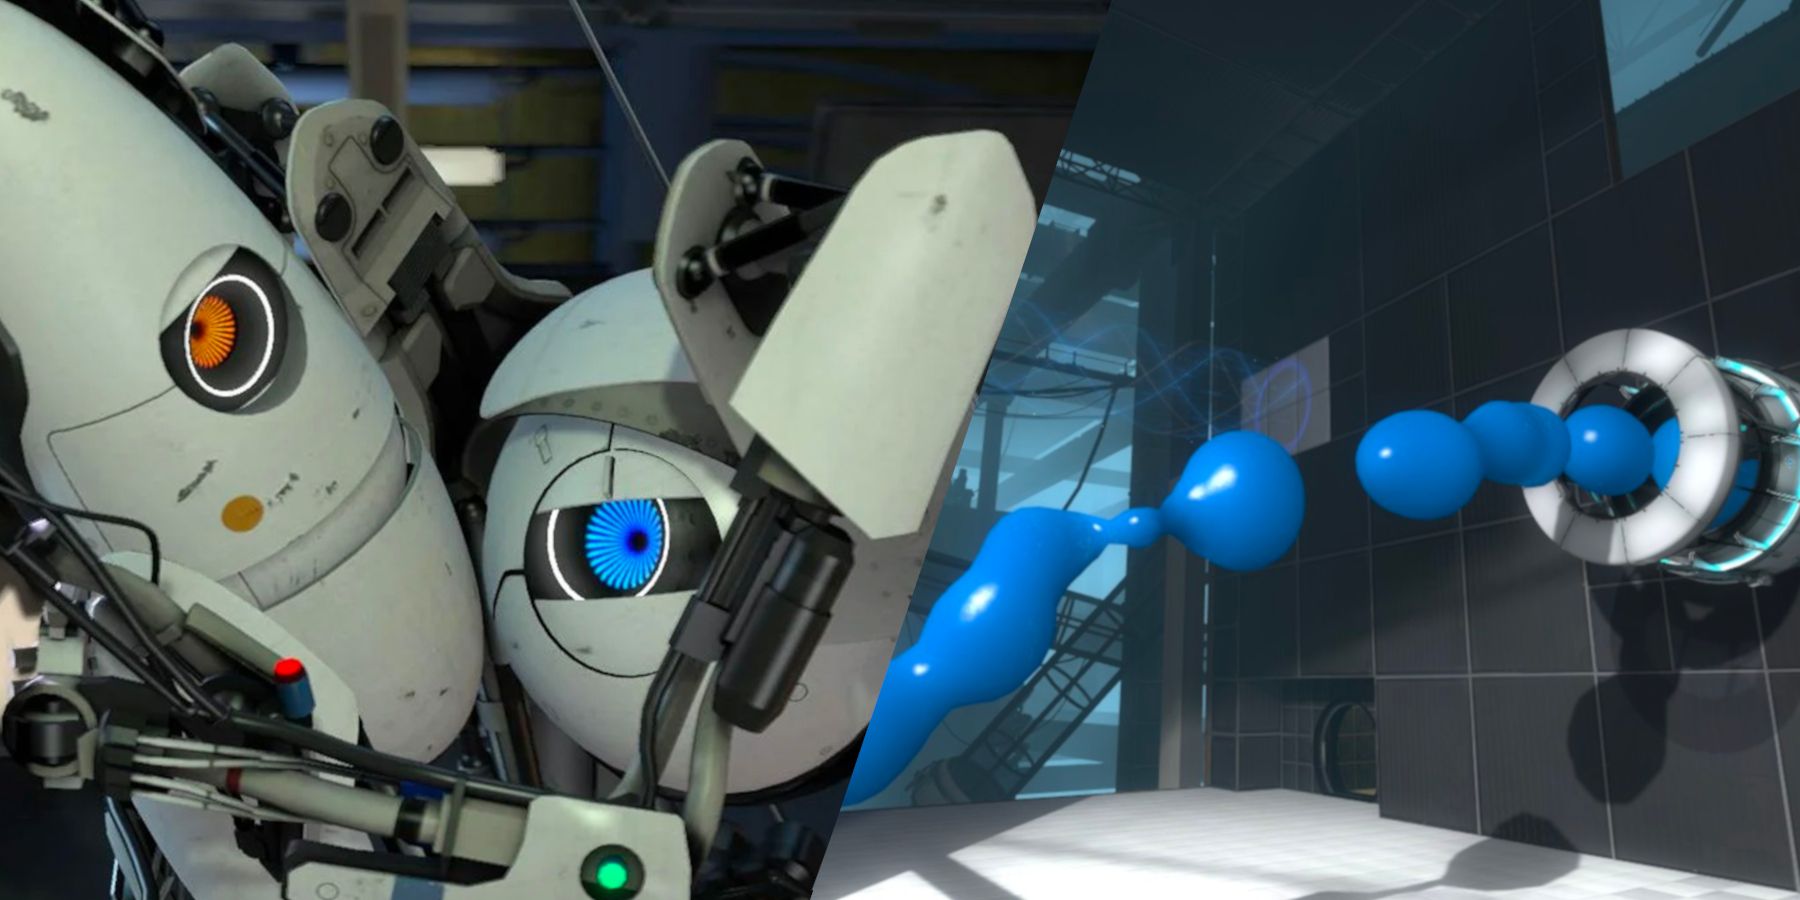 On the left: two robots, P-body and Atlas, hug each other and quiver with fear. On the right: Repulsion Gel, a thick blue liquid, shoots out of a wall in a bland, metallic test chamber.